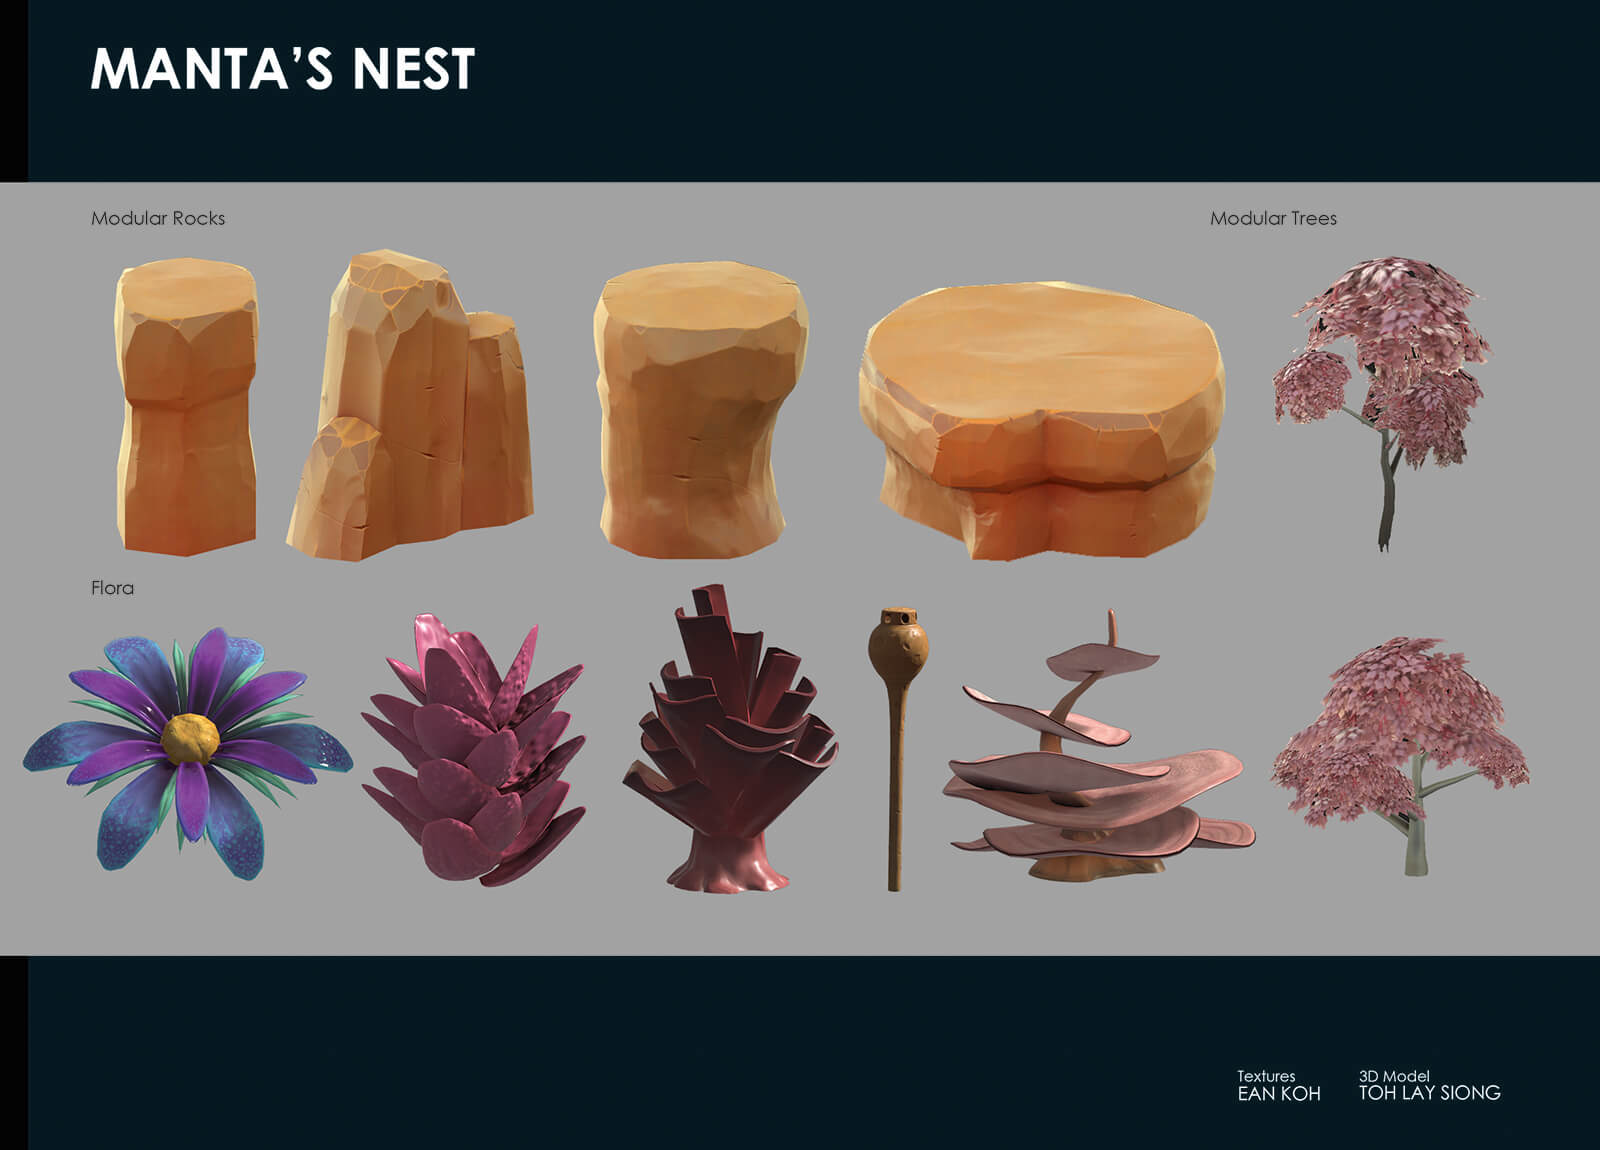 Designs for modular rocks, modular trees, and flora; 3D models by Toh Lay Siong and textures by Ean Koh.